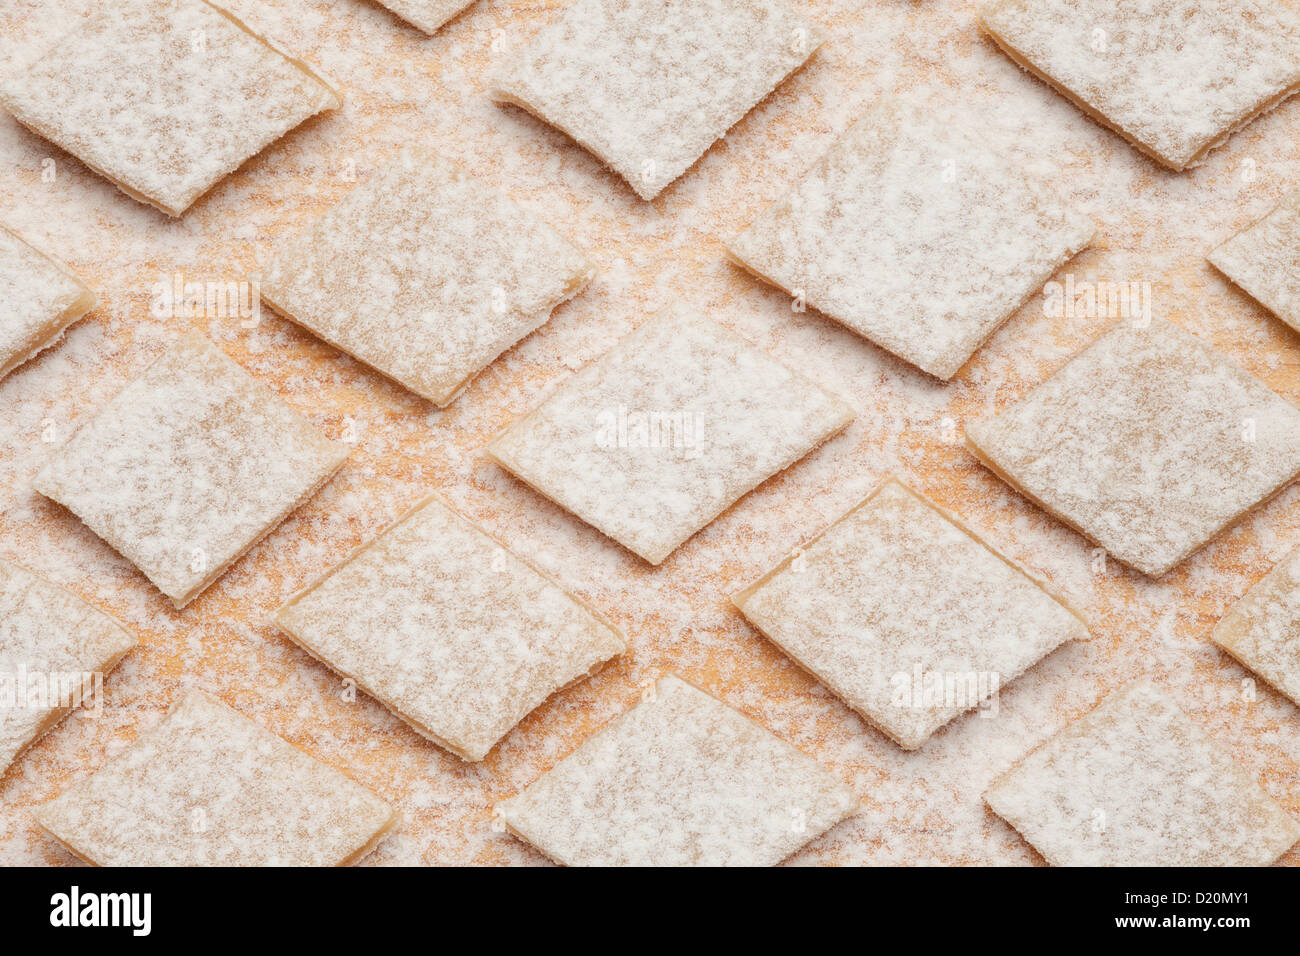 cut square homemade pasta strewed with flour or pasta background Stock Photo